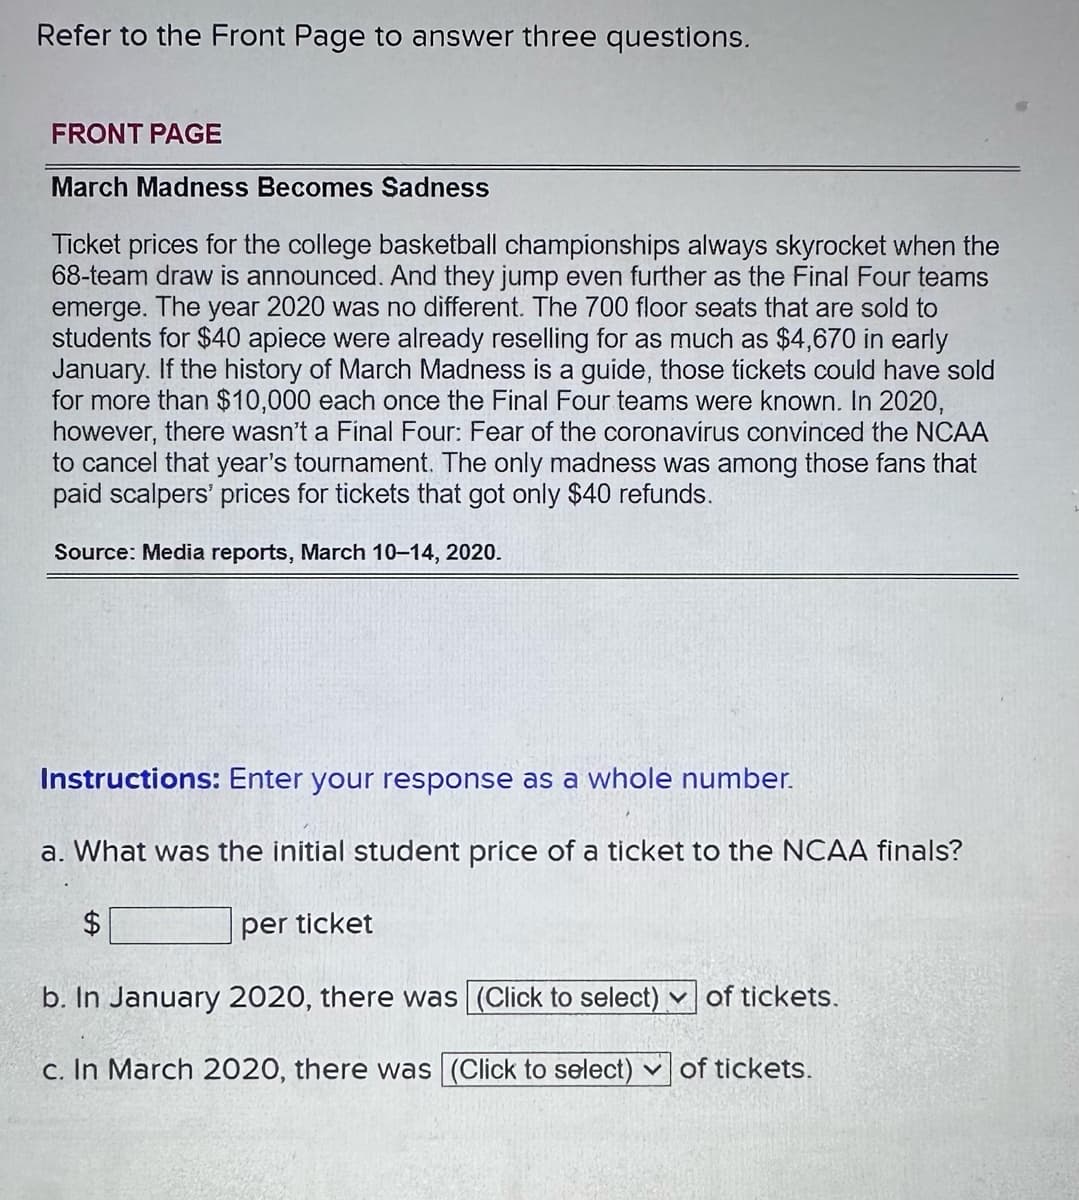 Refer to the Front Page to answer three questions.
FRONT PAGE
March Madness Becomes Sadness
Ticket prices for the college basketball championships always skyrocket when the
68-team draw is announced. And they jump even further as the Final Four teams
emerge. The year 2020 was no different. The 700 floor seats that are sold to
students for $40 apiece were already reselling for as much as $4,670 in early
January. If the history of March Madness is a guide, those tickets could have sold
for more than $10,000 each once the Final Four teams were known. In 2020,
however, there wasn't a Final Four: Fear of the coronavirus convinced the NCAA
to cancel that year's tournament. The only madness was among those that
paid scalpers' prices for tickets that got only $40 refunds.
Source: Media reports, March 10-14, 2020.
Instructions: Enter your response as a whole number.
a. What was the initial student price of a ticket to the NCAA finals?
$
per ticket
b. In January 2020, there was (Click to select) of tickets.
c. In March 2020, there was (Click to select) of tickets.